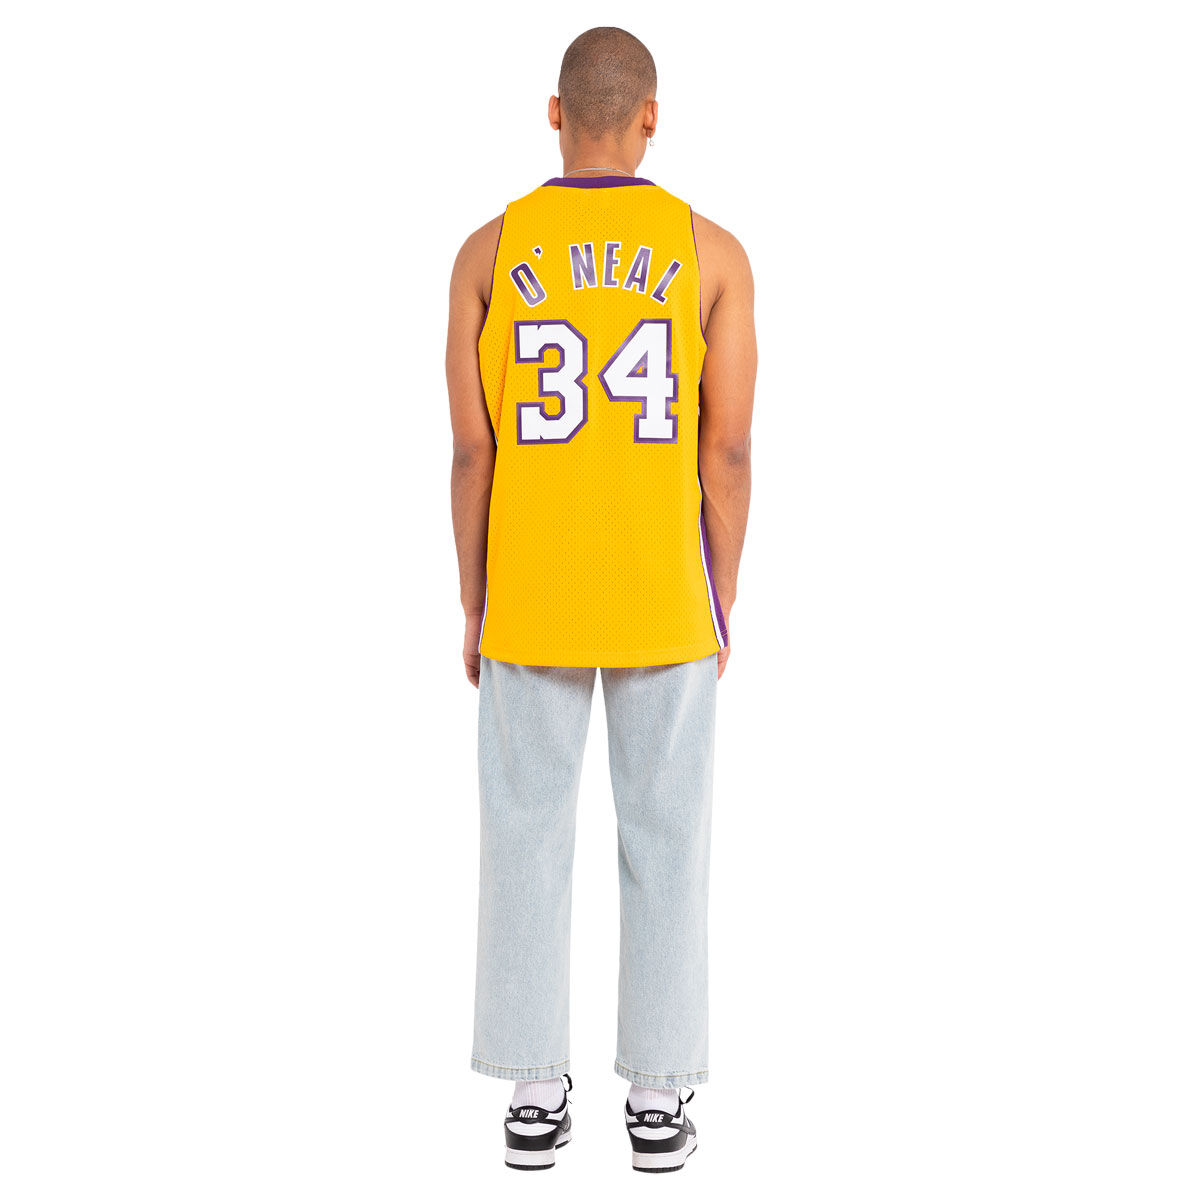 Unbranded Los Angeles Lakers NBA Jerseys for sale